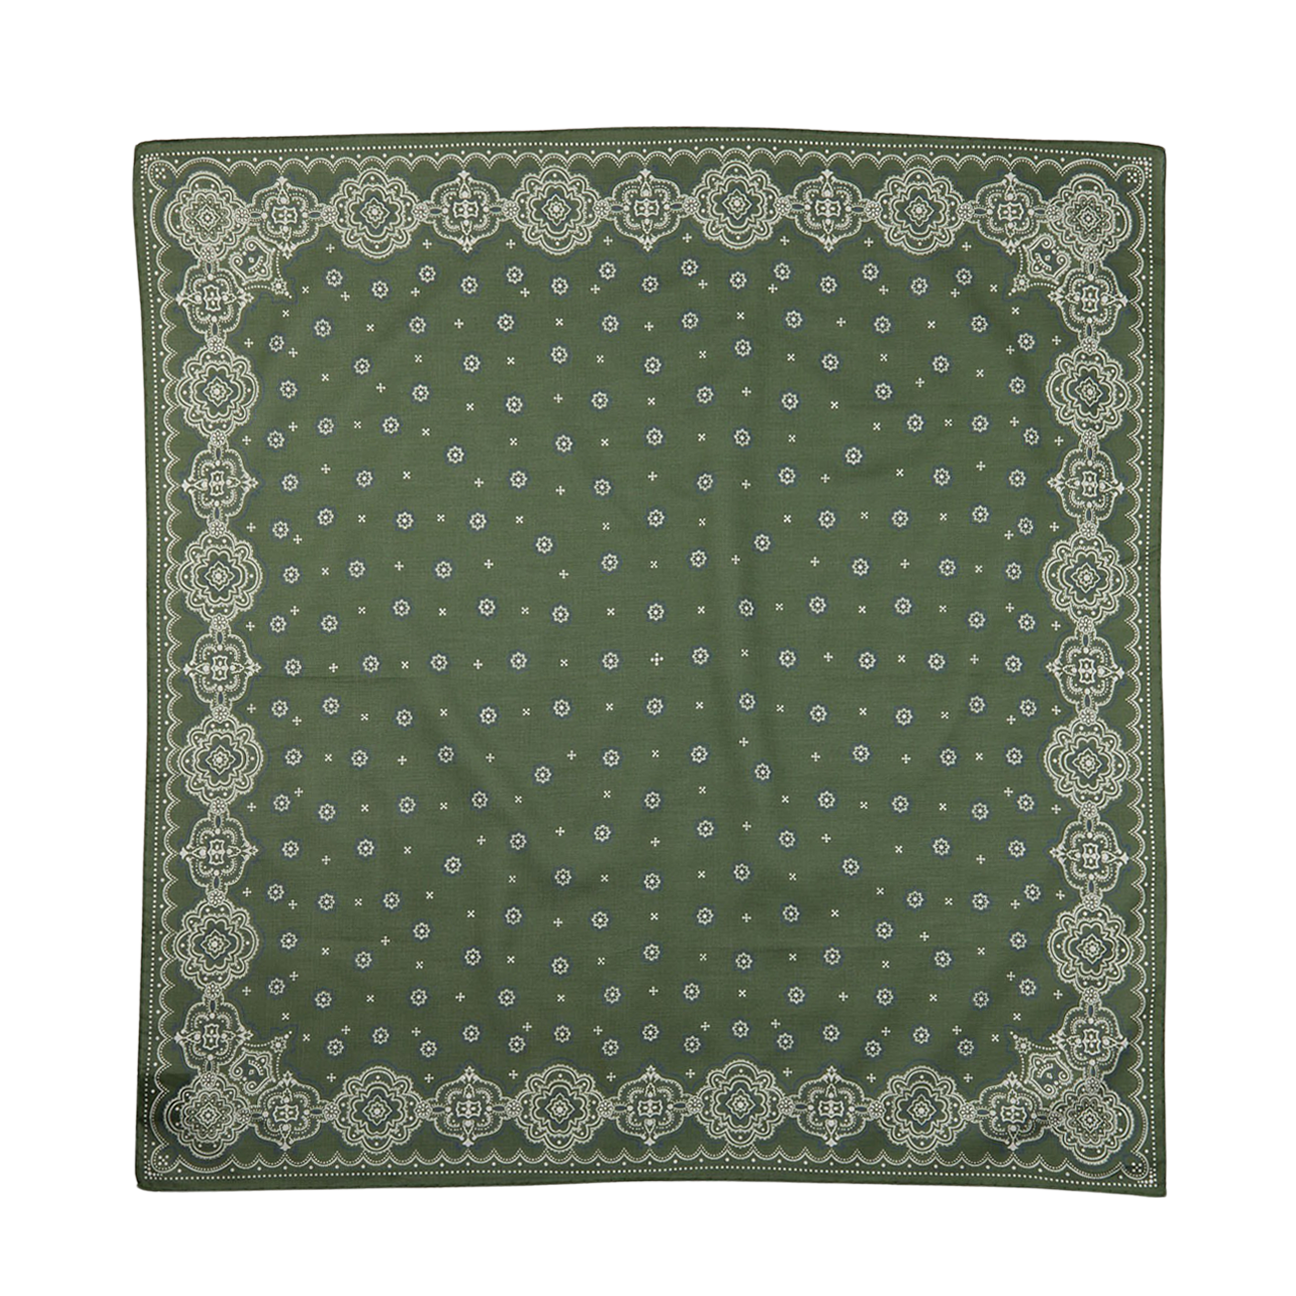 Olive Green Medallion Printed Cotton Bandana with intricate medallion patterns and border by Amanda Christensen.